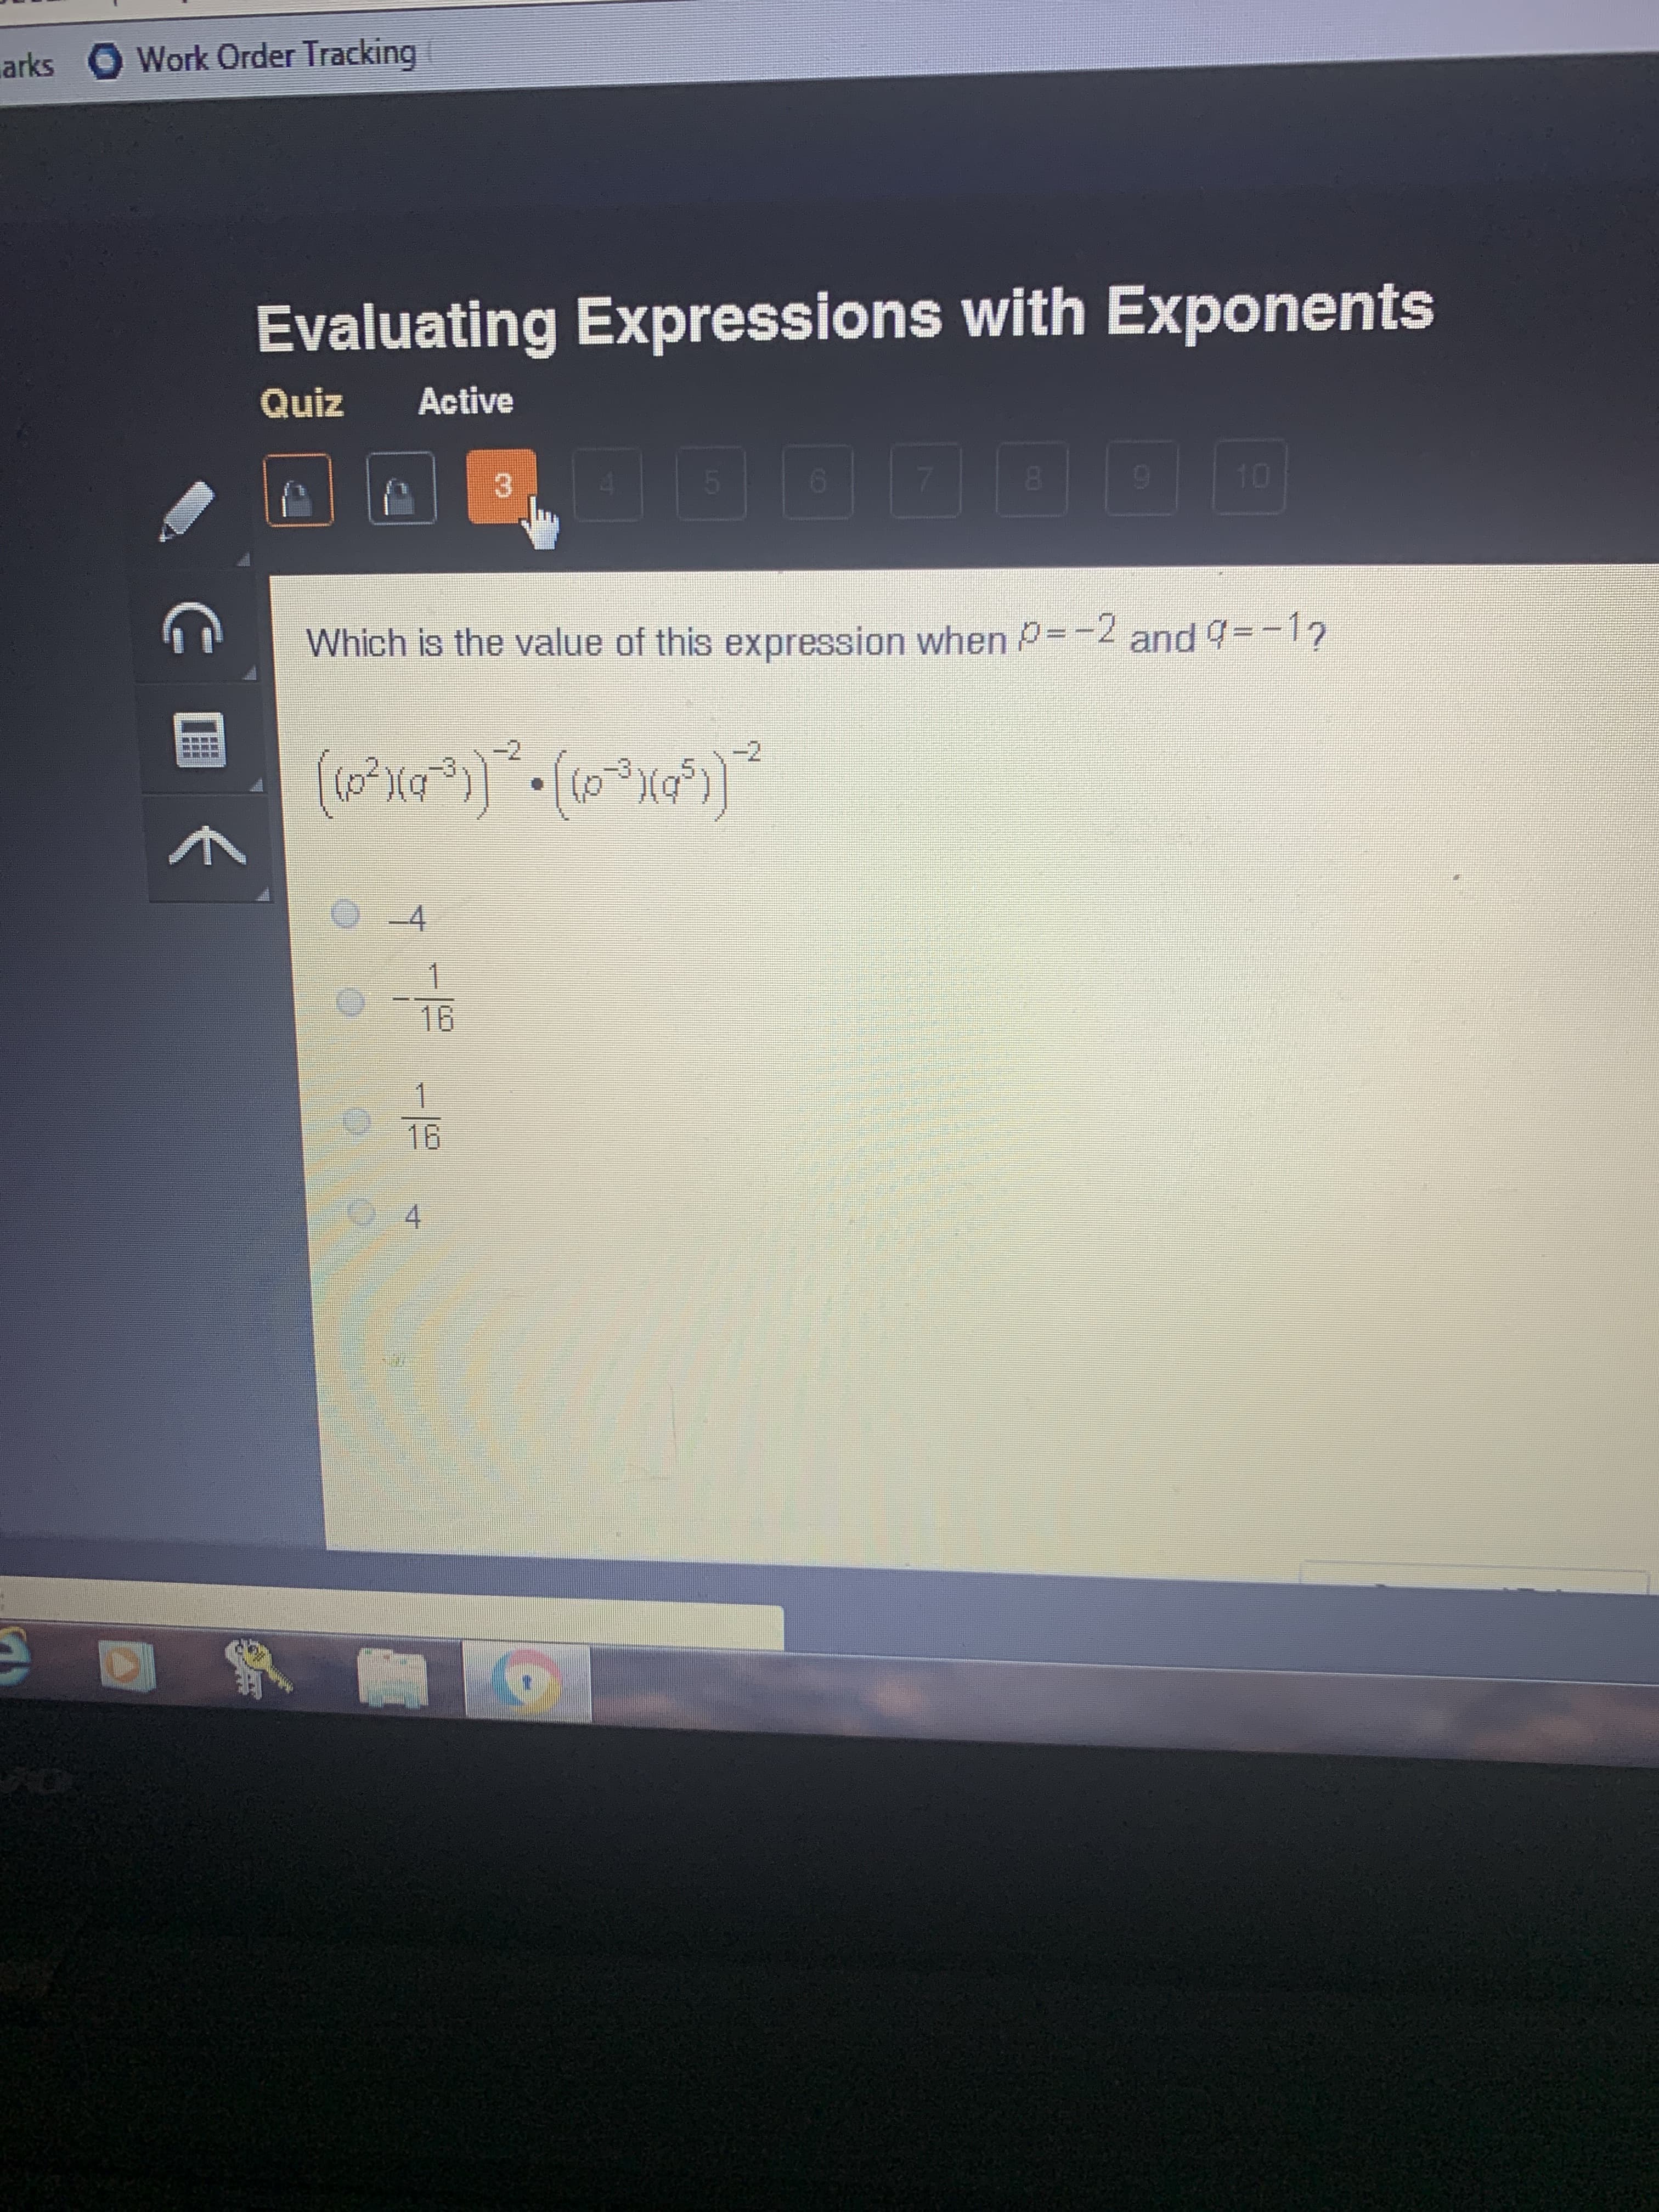 Work Order Tracking
arks
Evaluating Expressions with Exponents
Active
Quiz
10
8.
4.
Which is the value of this expression when P=-2 and 9=-17
wwww
-2
(00).
-3
-4
1
16
1
16
4.
